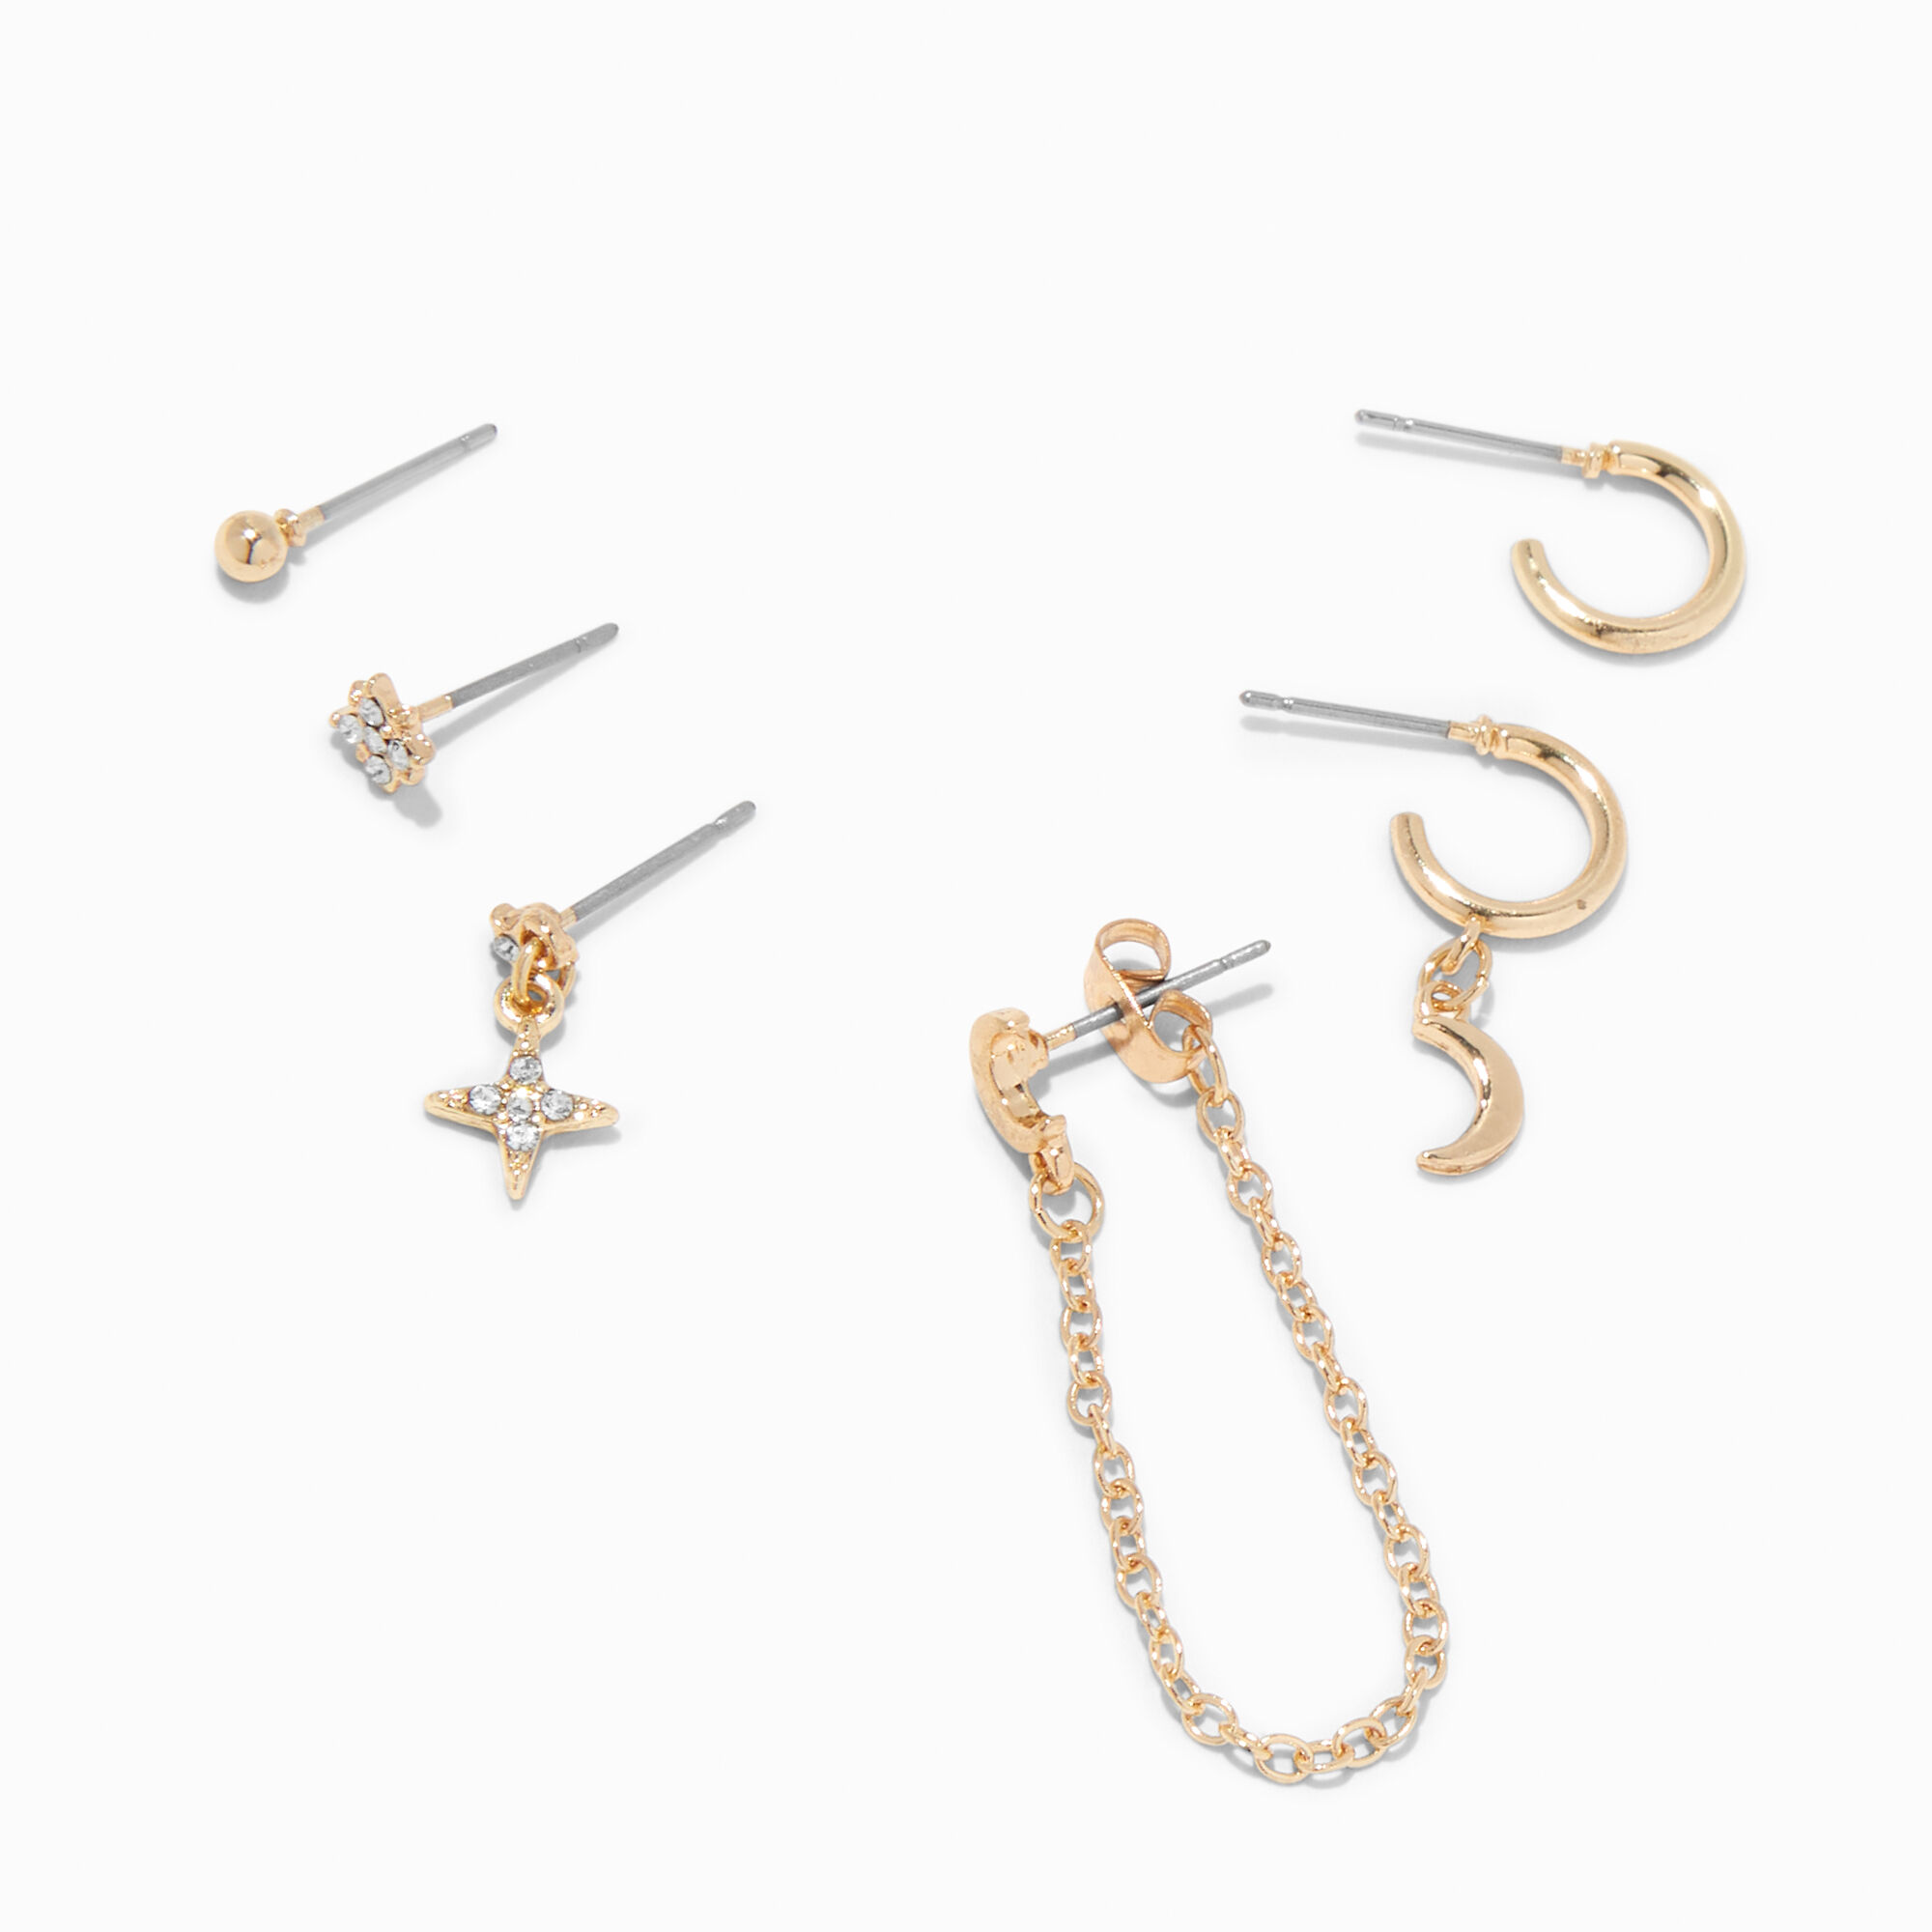 View Claires Tone Mixed Crescent Moon One Earrings Set 6 Pack Gold information